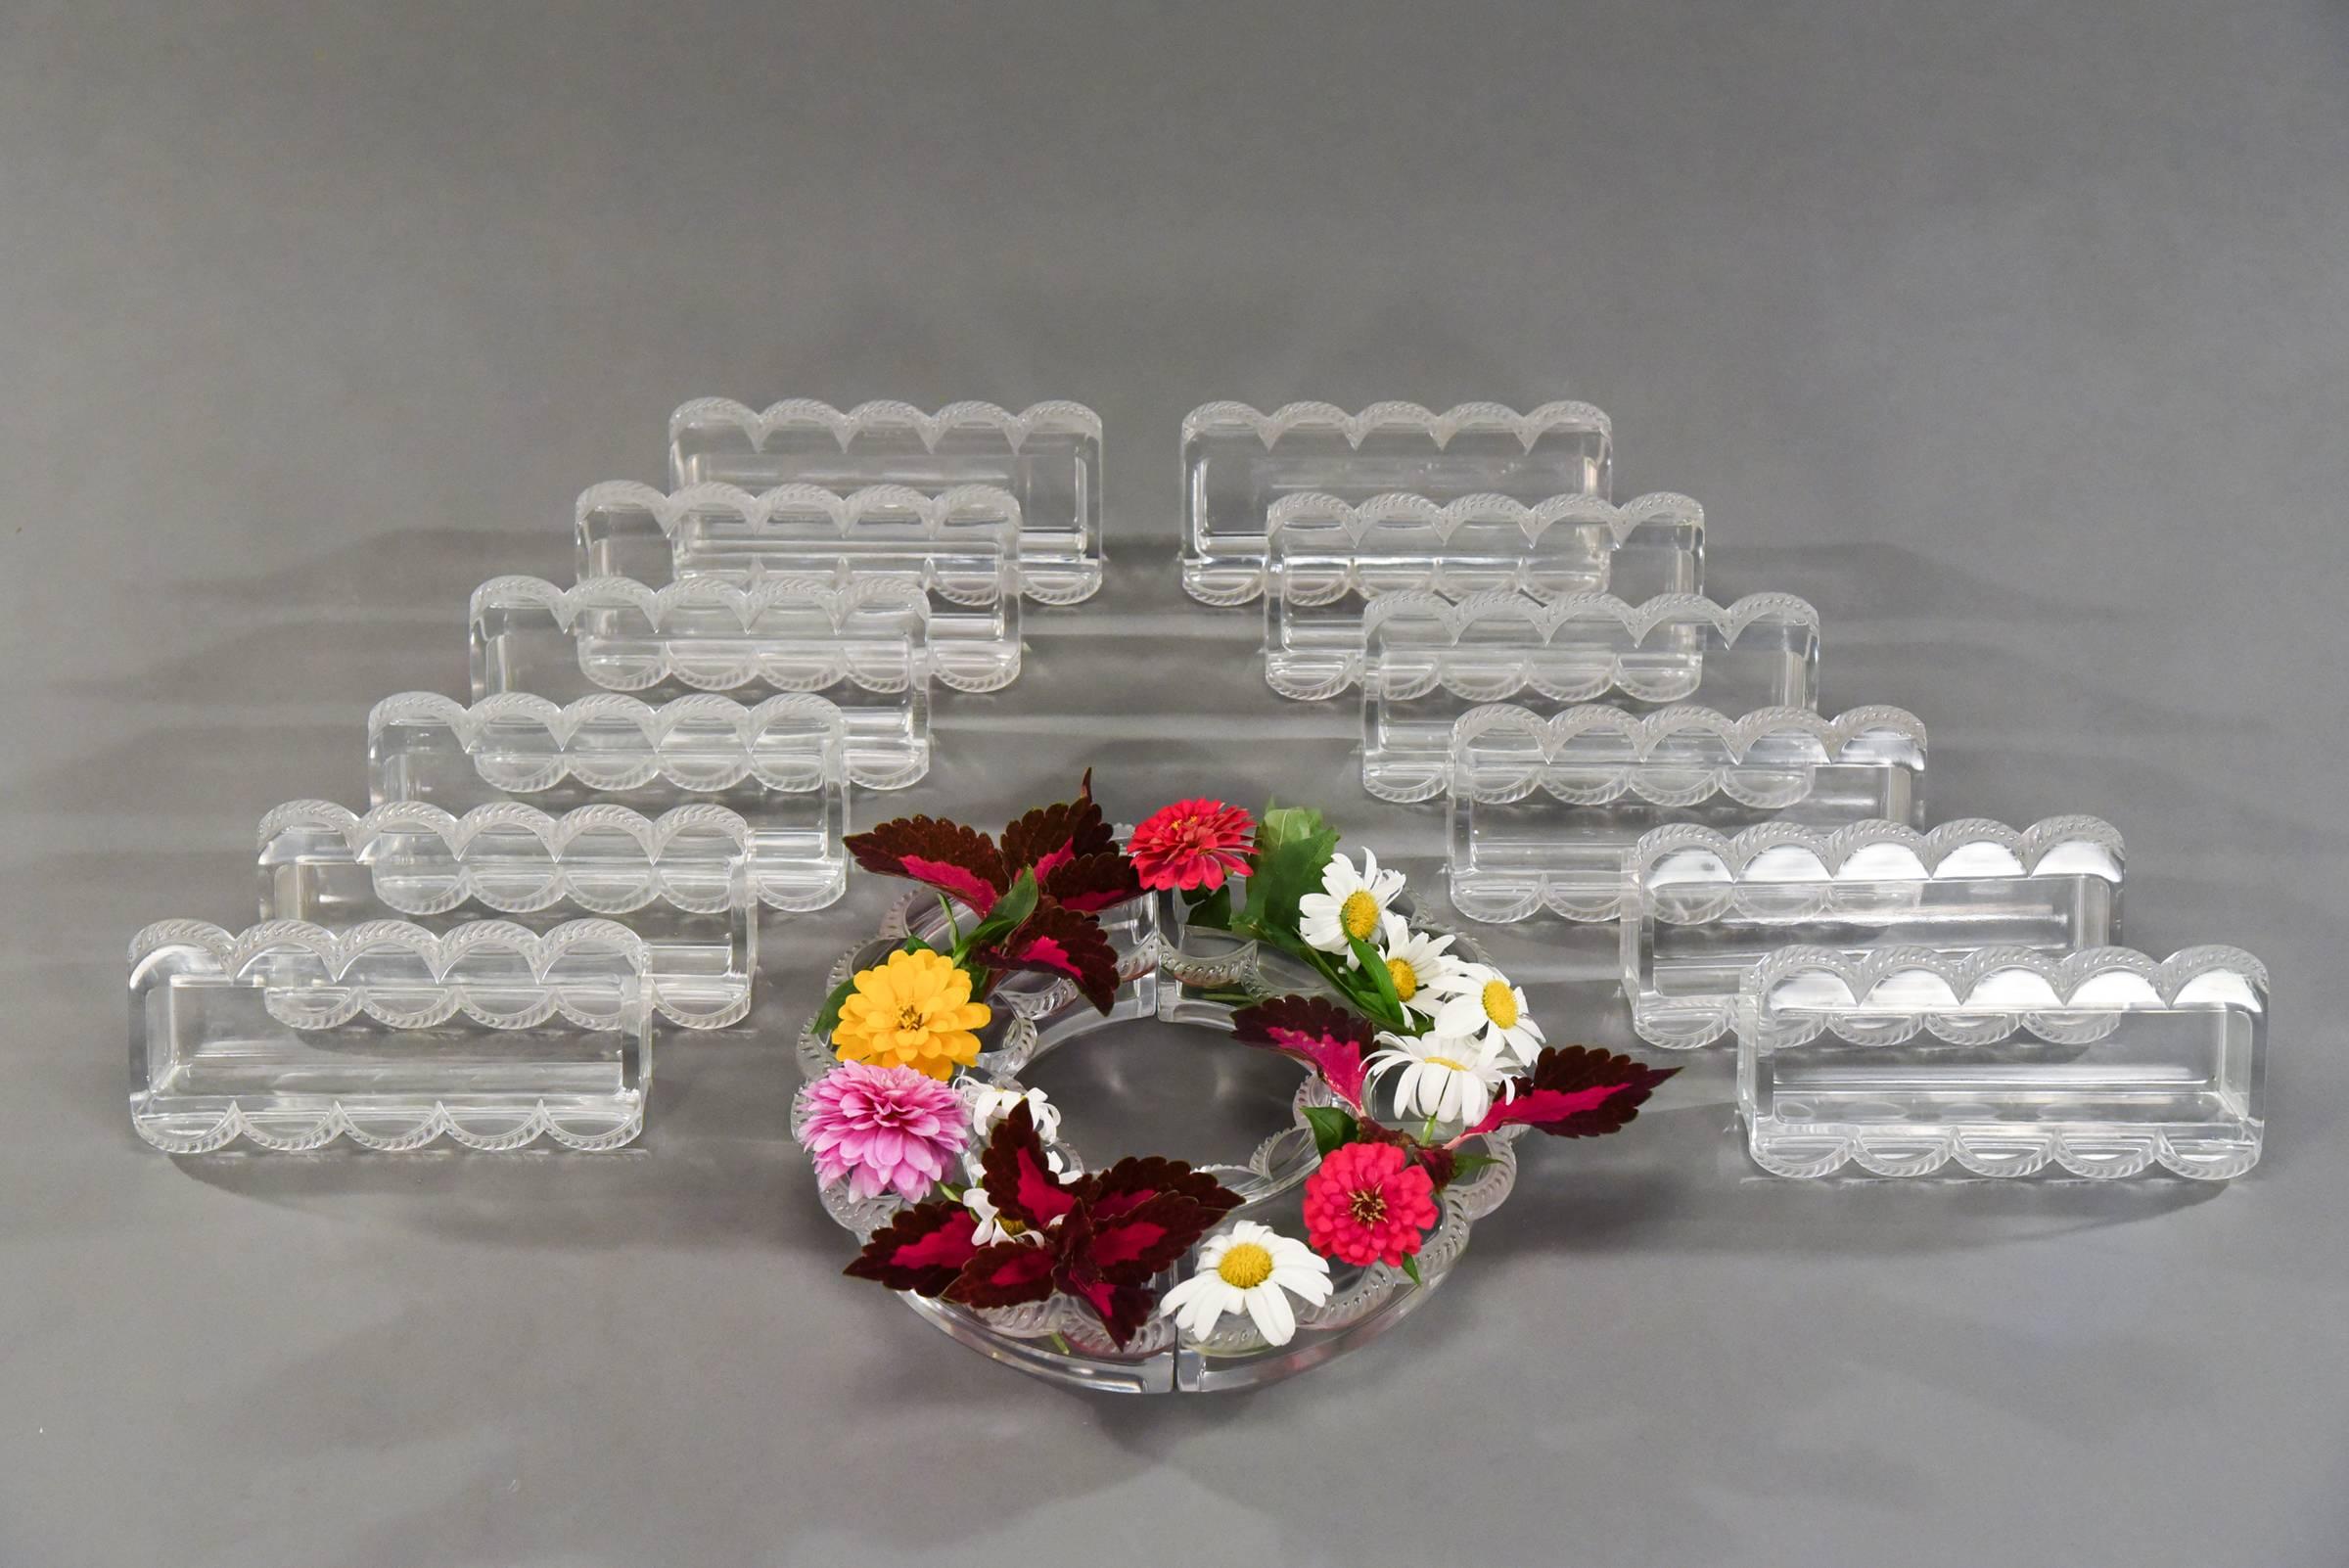 This is one of the most versatile and complete Lalique centerpieces as it is comprised of 16 pieces, allowing for many arrangement options. Please view all the images to get an idea of the many possibilities for positioning the pieces.
These can be